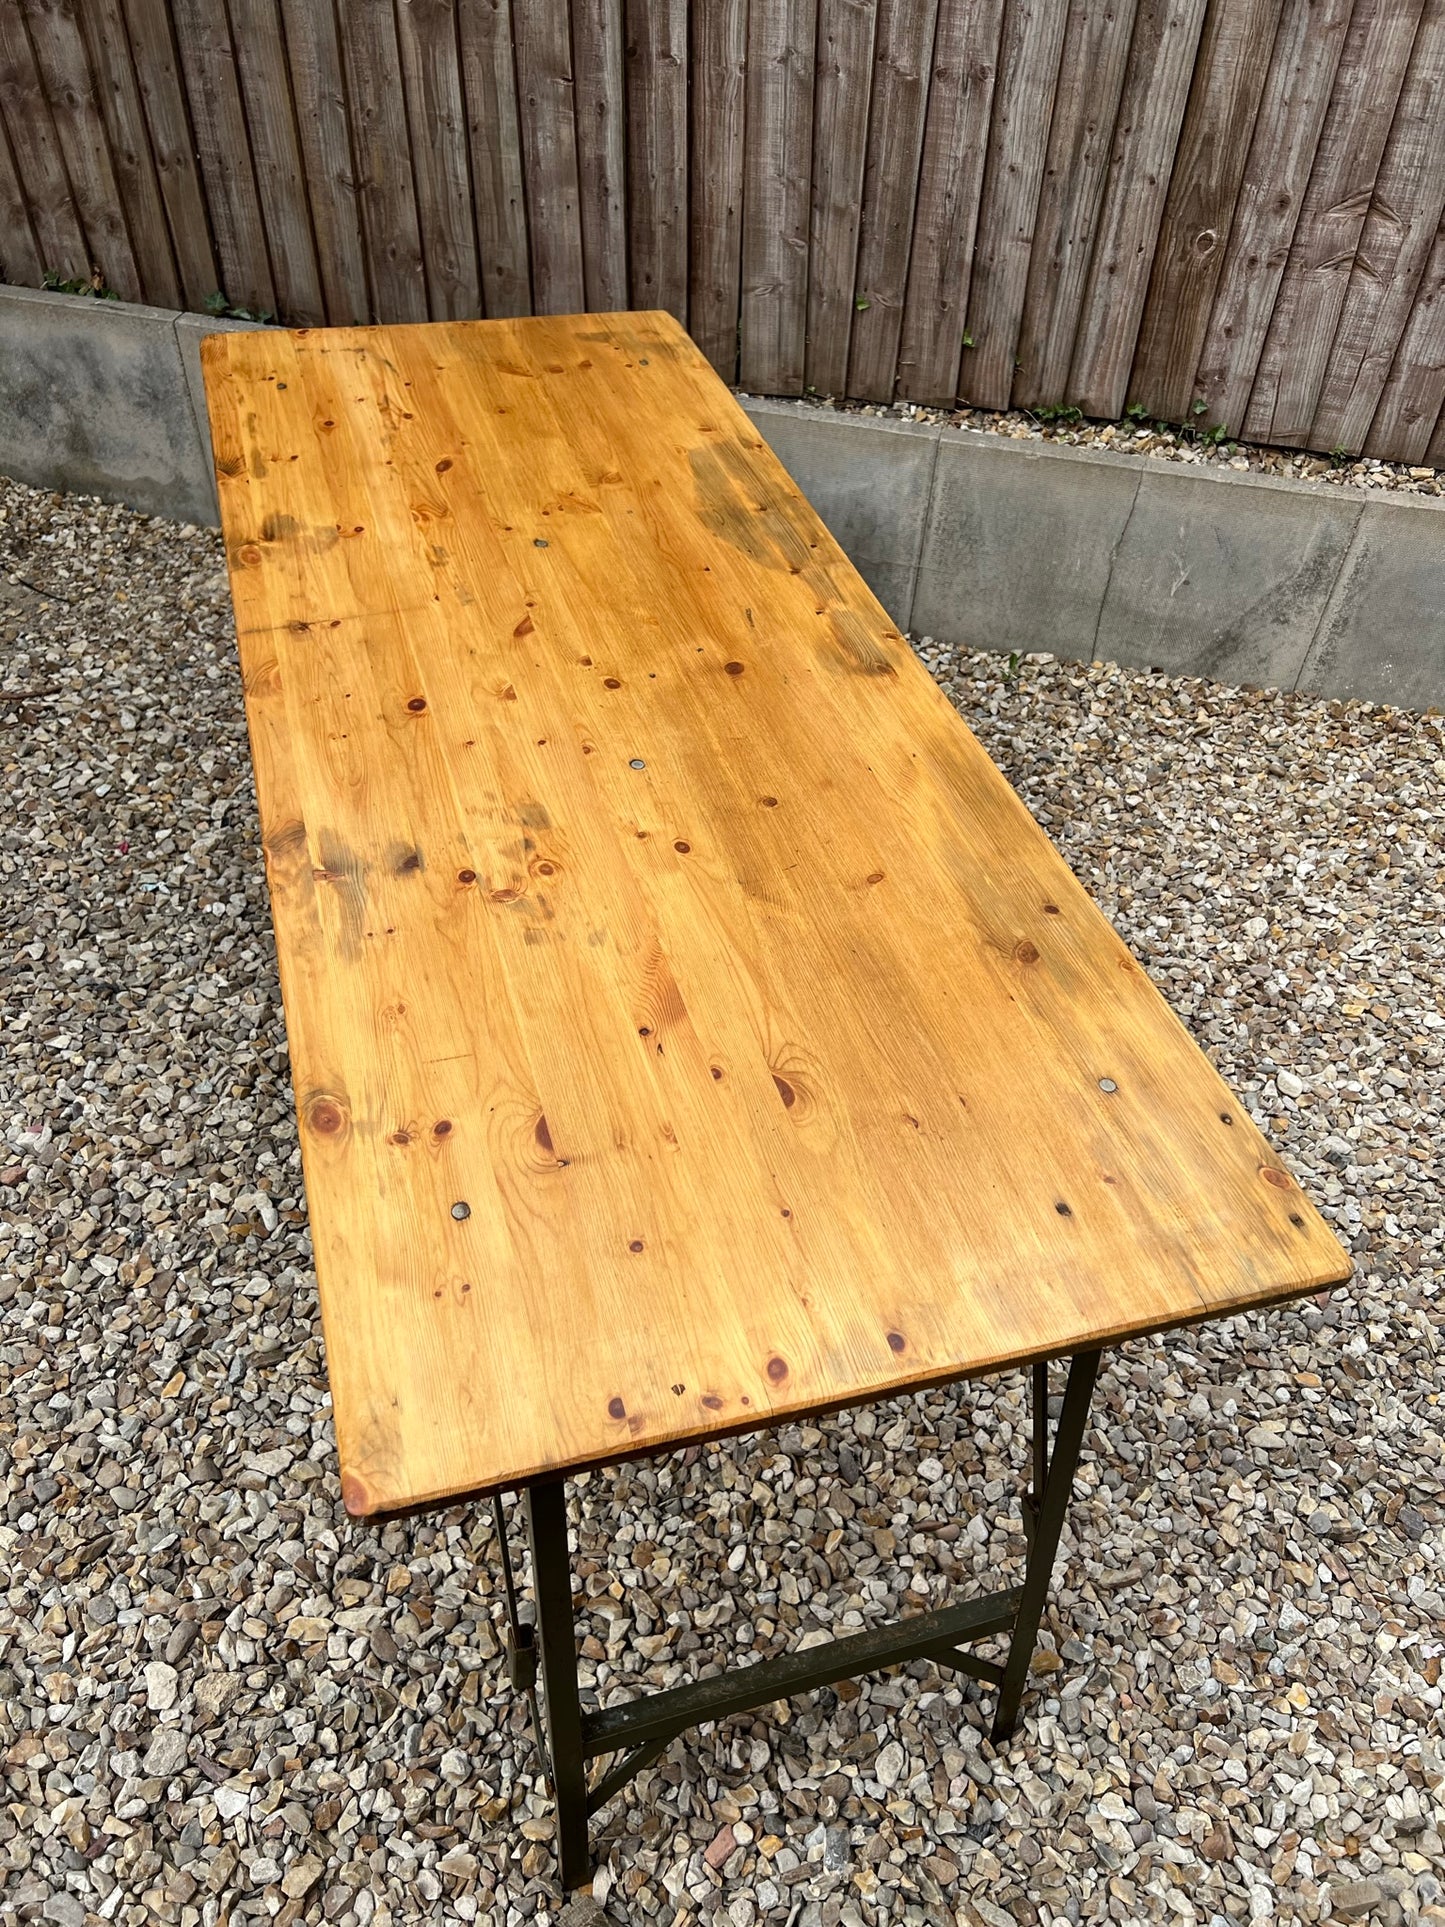 Rustic Wooden Folding Trestle Table 6ft Industrial Farmhouse Dining Garden Reclaimed Army